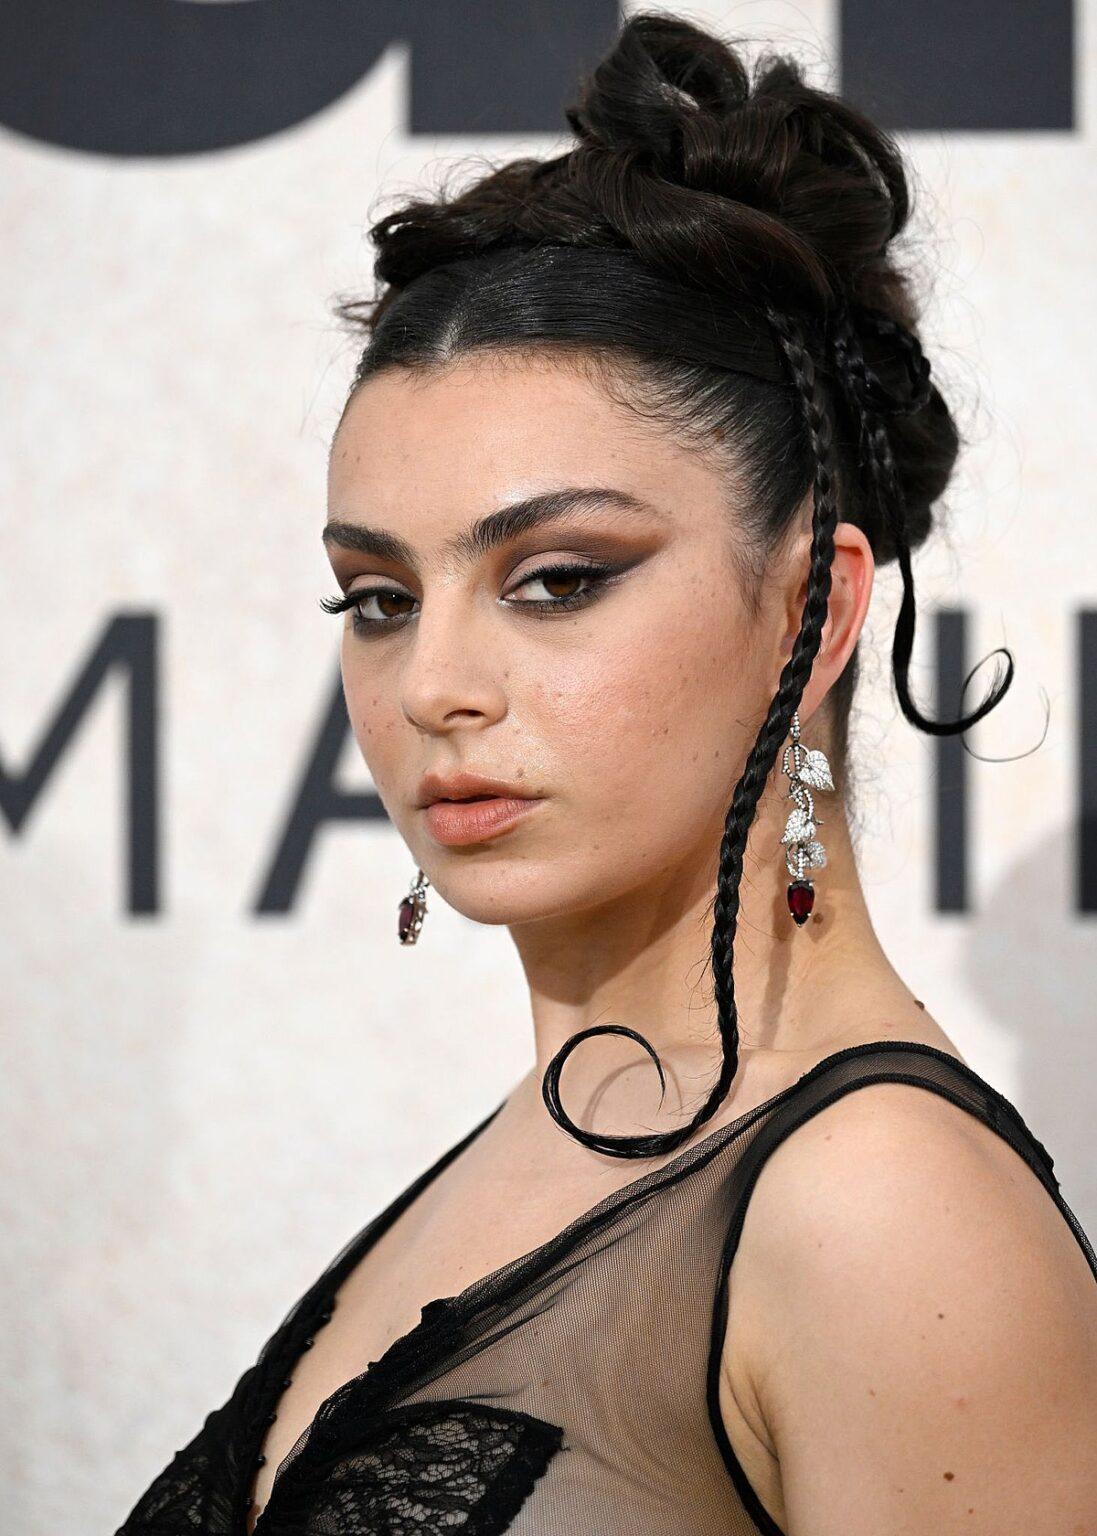 Charli XCX Birth Chart, Mother, Sexuality, Store, How Old Is, New Album